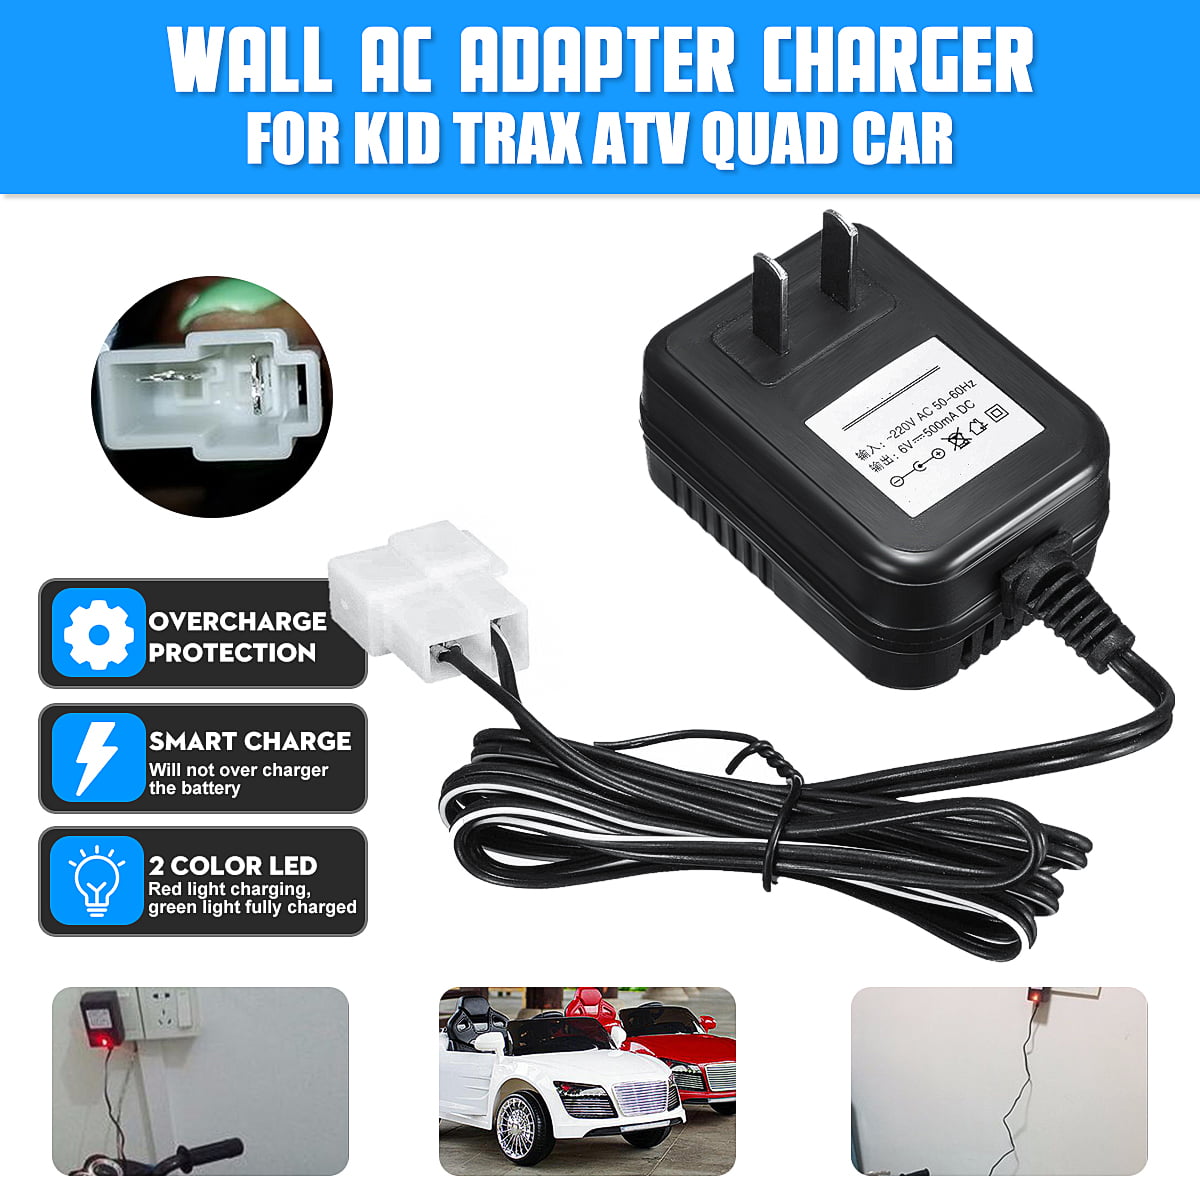 6V Wall AC Adapter Charger Power Supply For Kid TRAX ATV Quad Ride On Car #FAS 